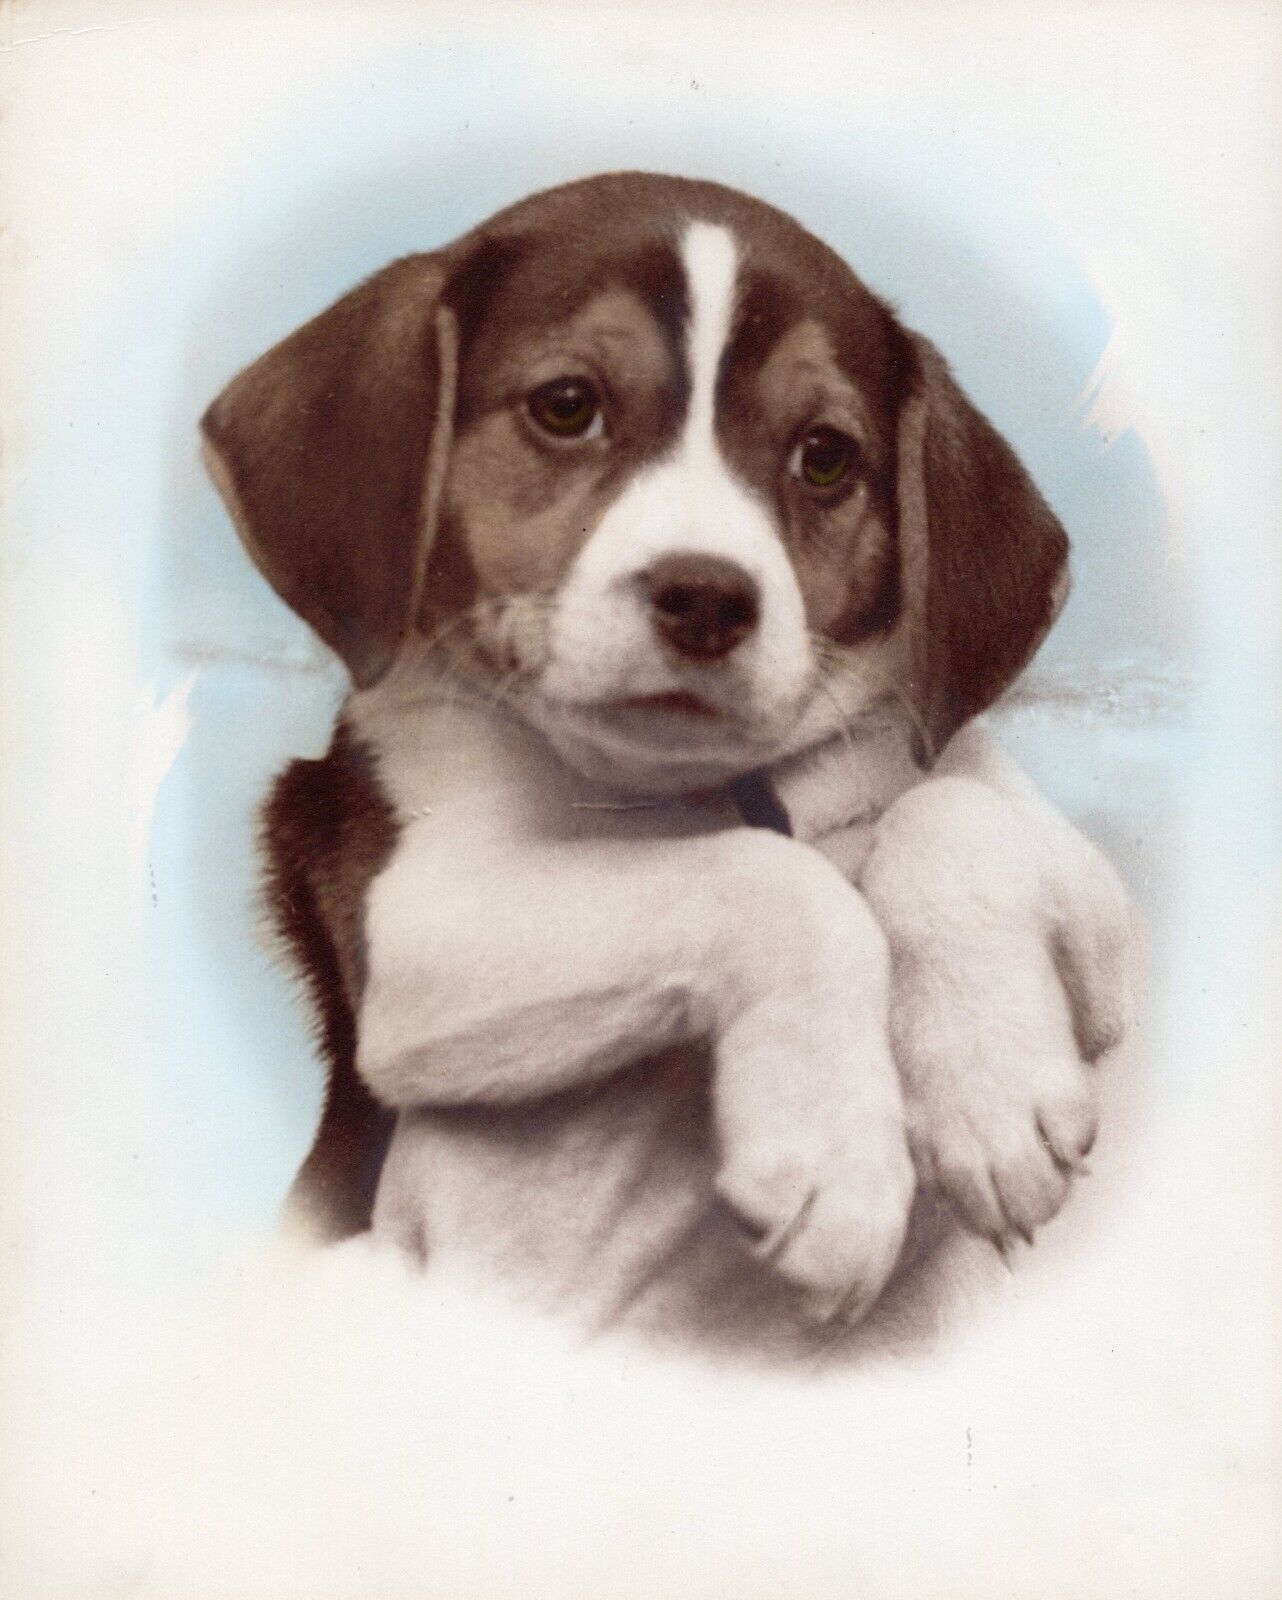 Cute Puppy Dog Vintage Photograph 8x 10 in.